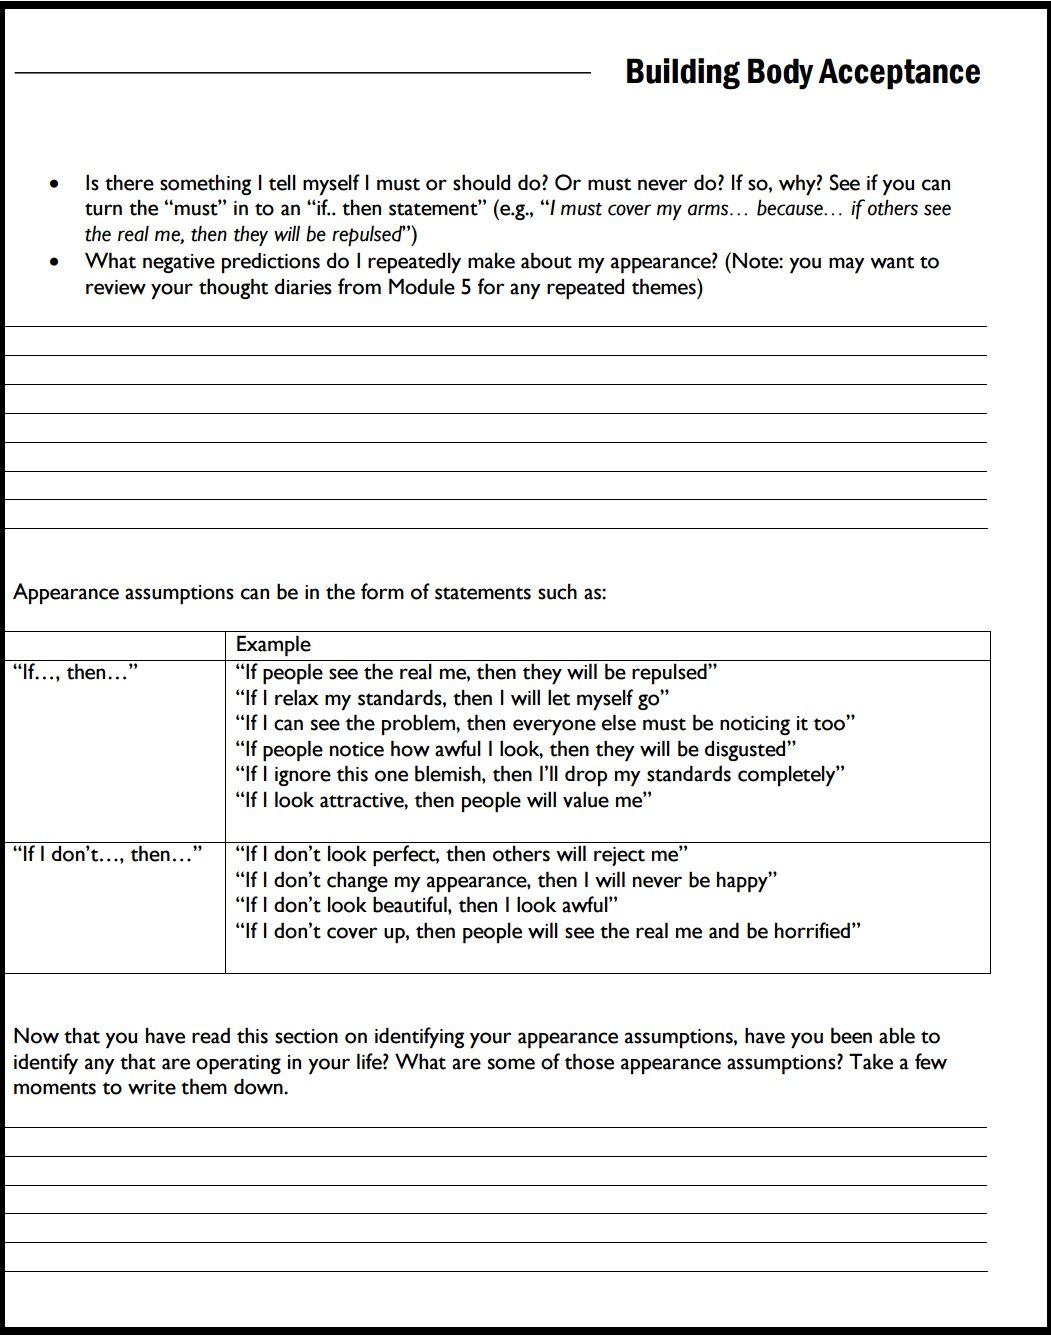 Between Sessions Mental Health Worksheets For Adults | Cognitive | Printable Mental Health Worksheets For Adults